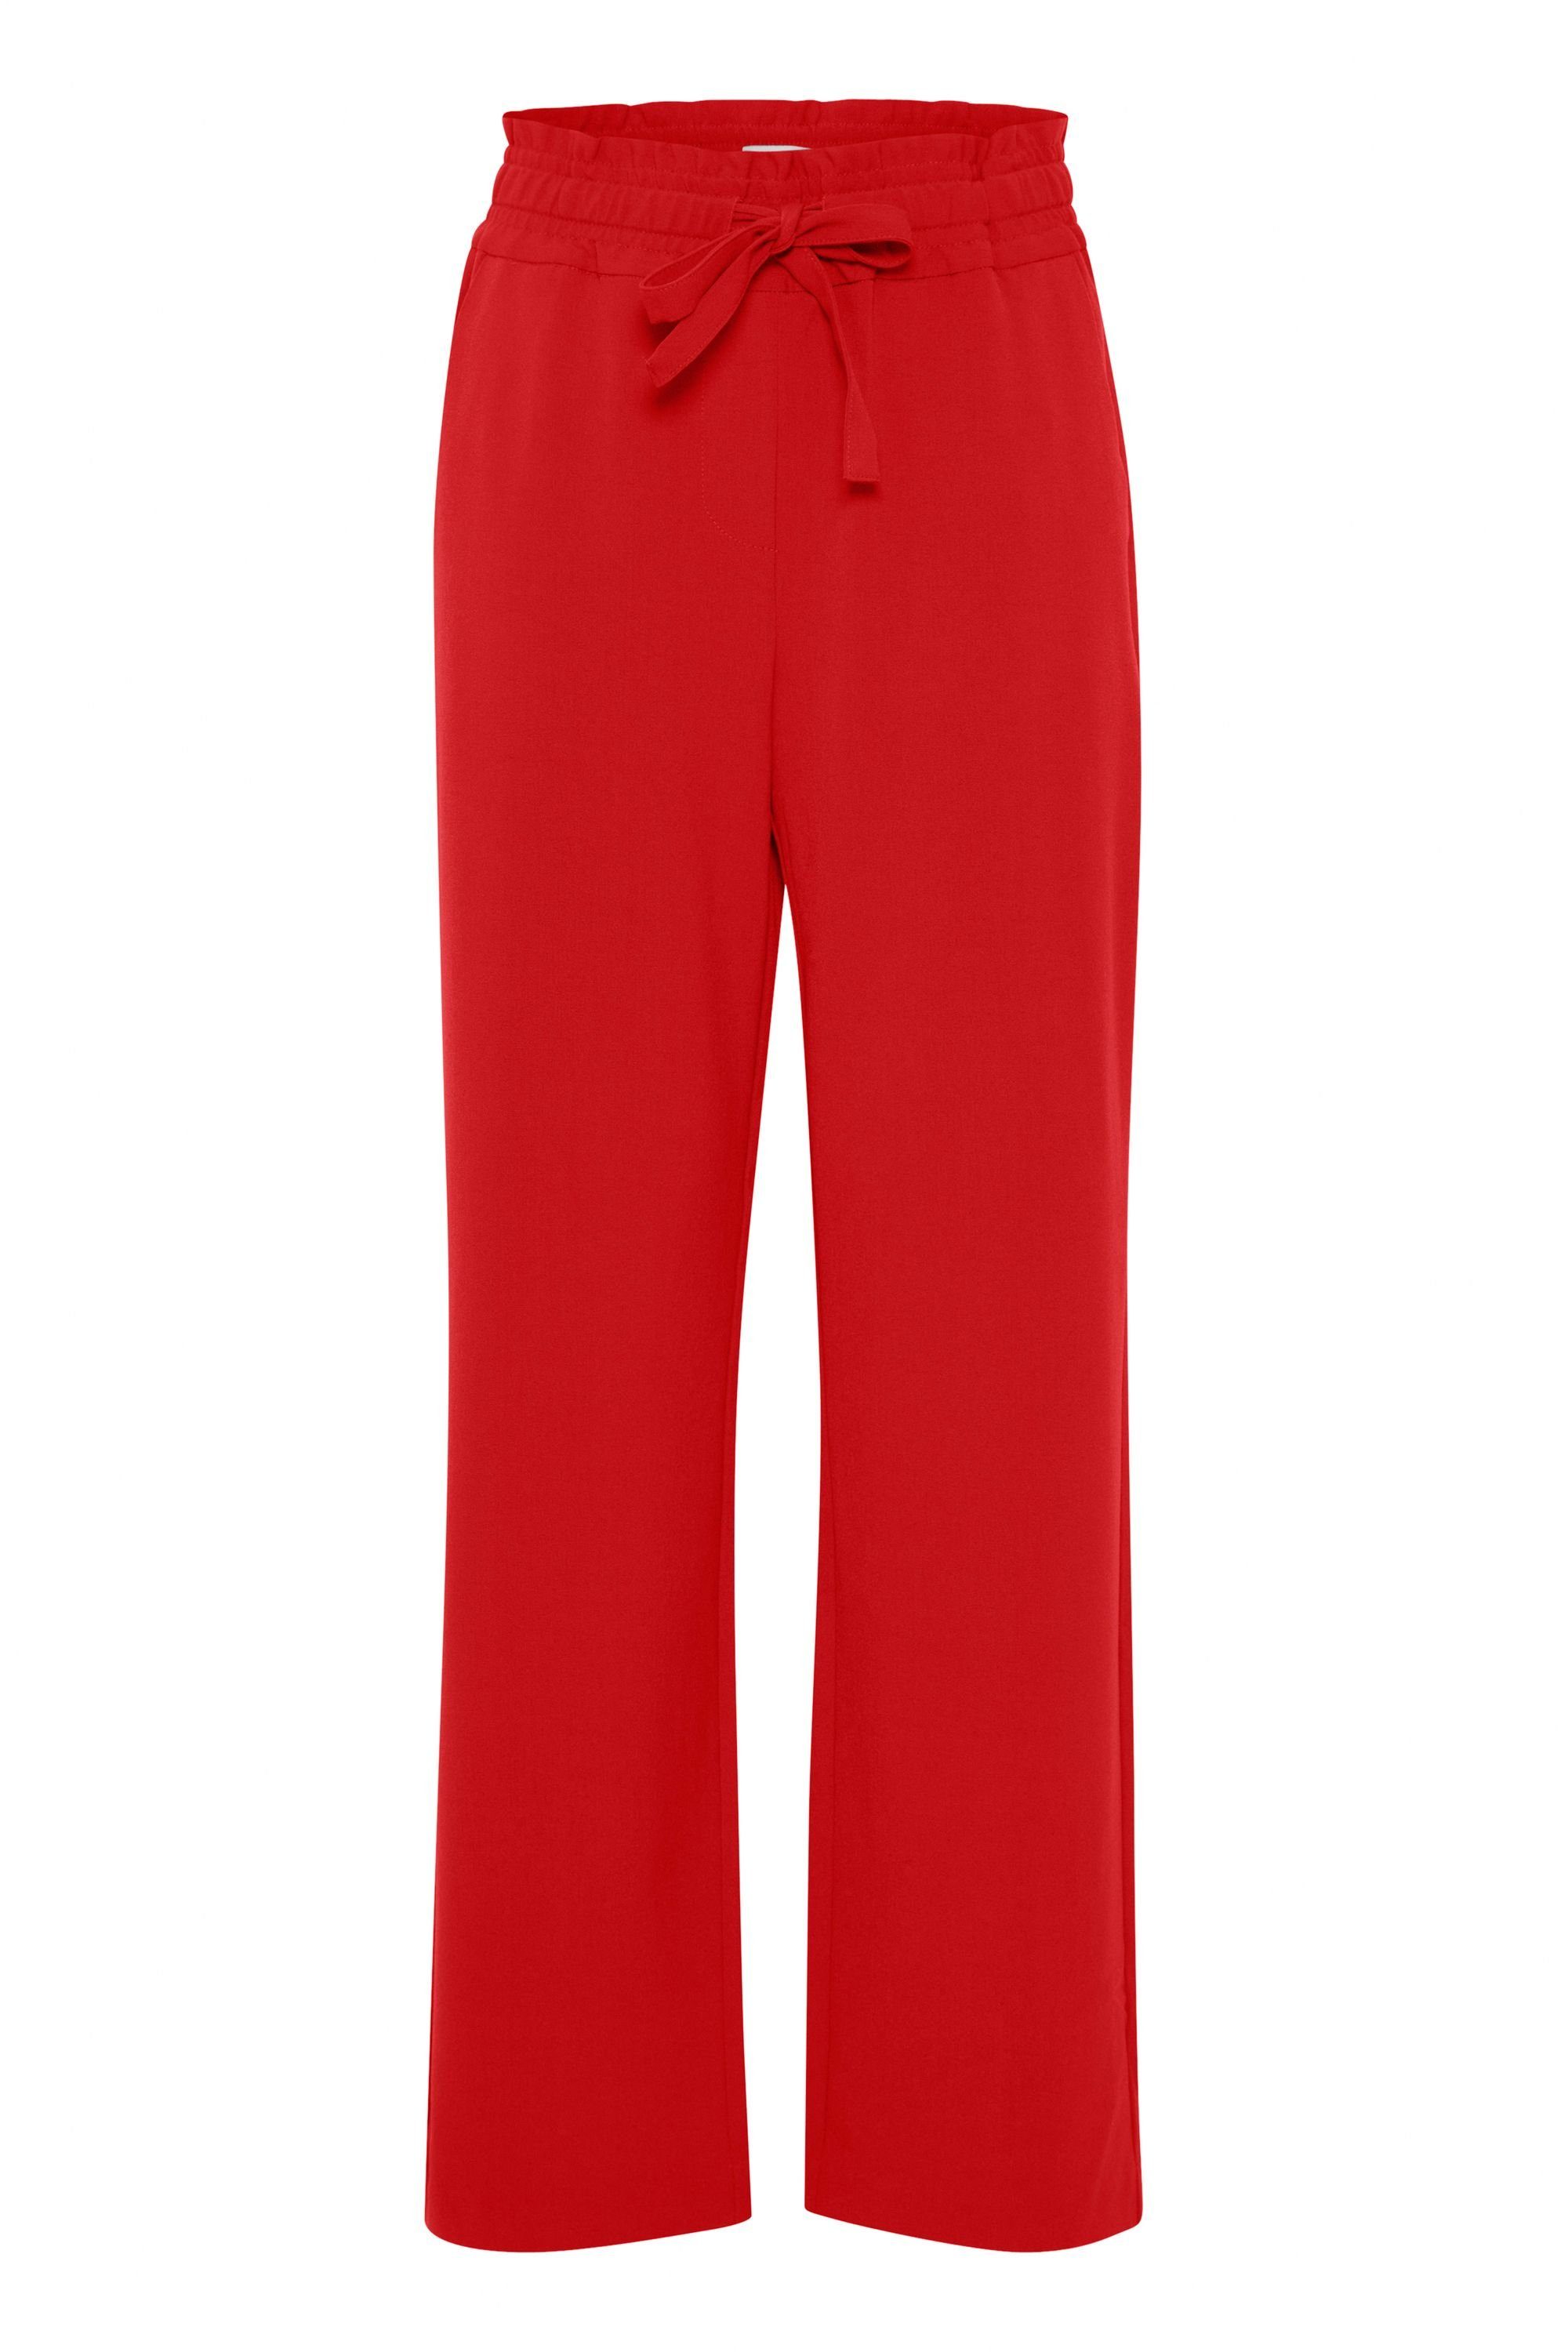 b.young Jogger Pants BYDANTA CASUAL PANT Y - 20813077 Chinese Red (181663)